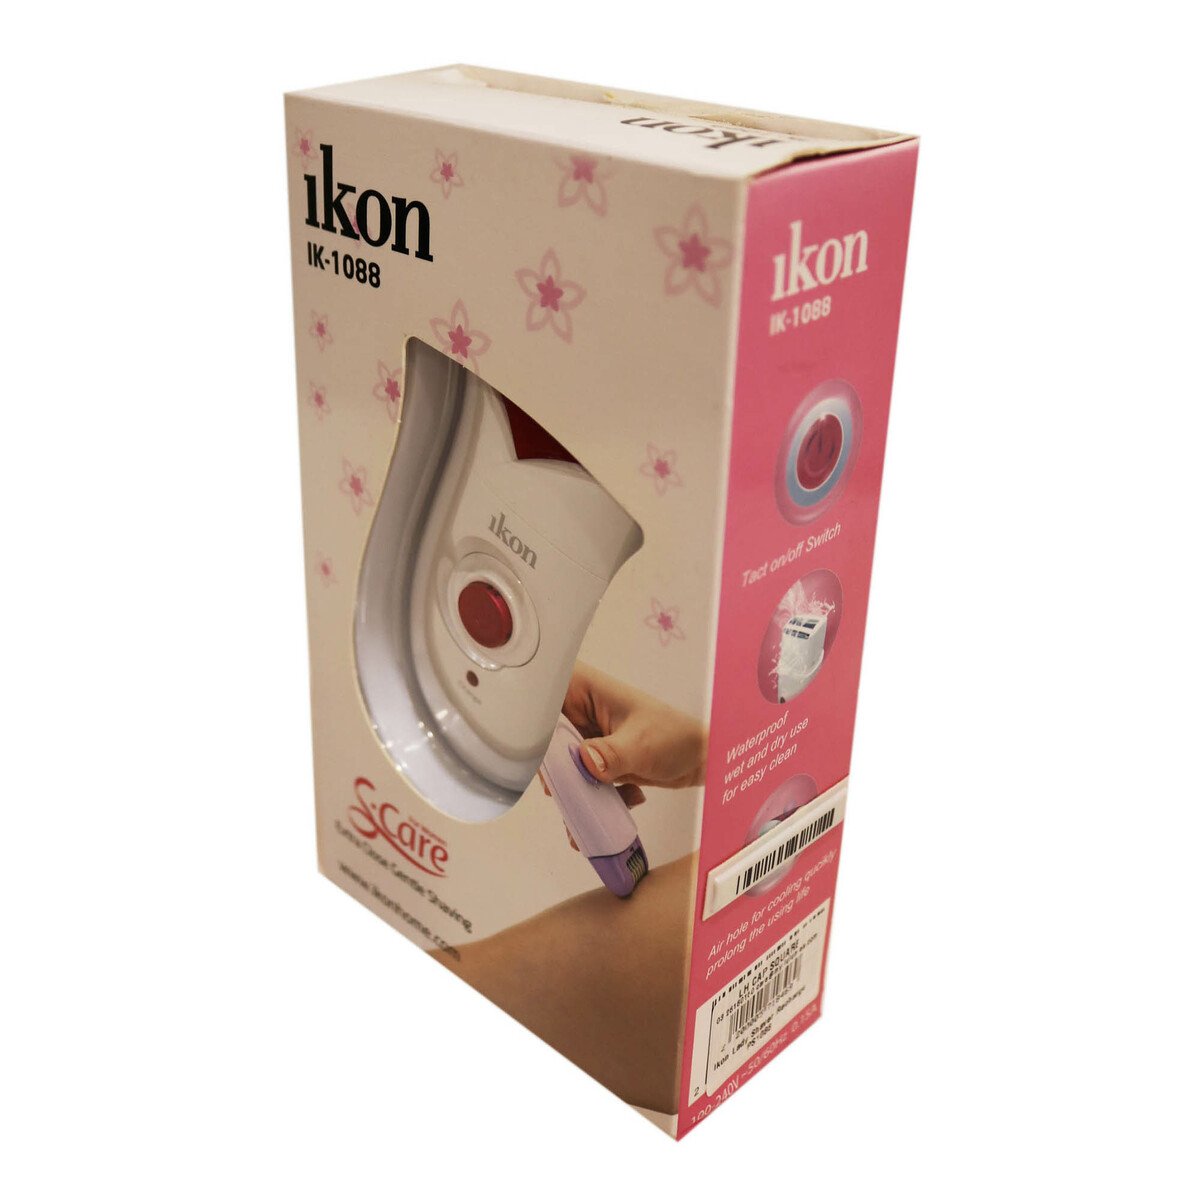 Ikon Lady Shaver Recharge PS1088